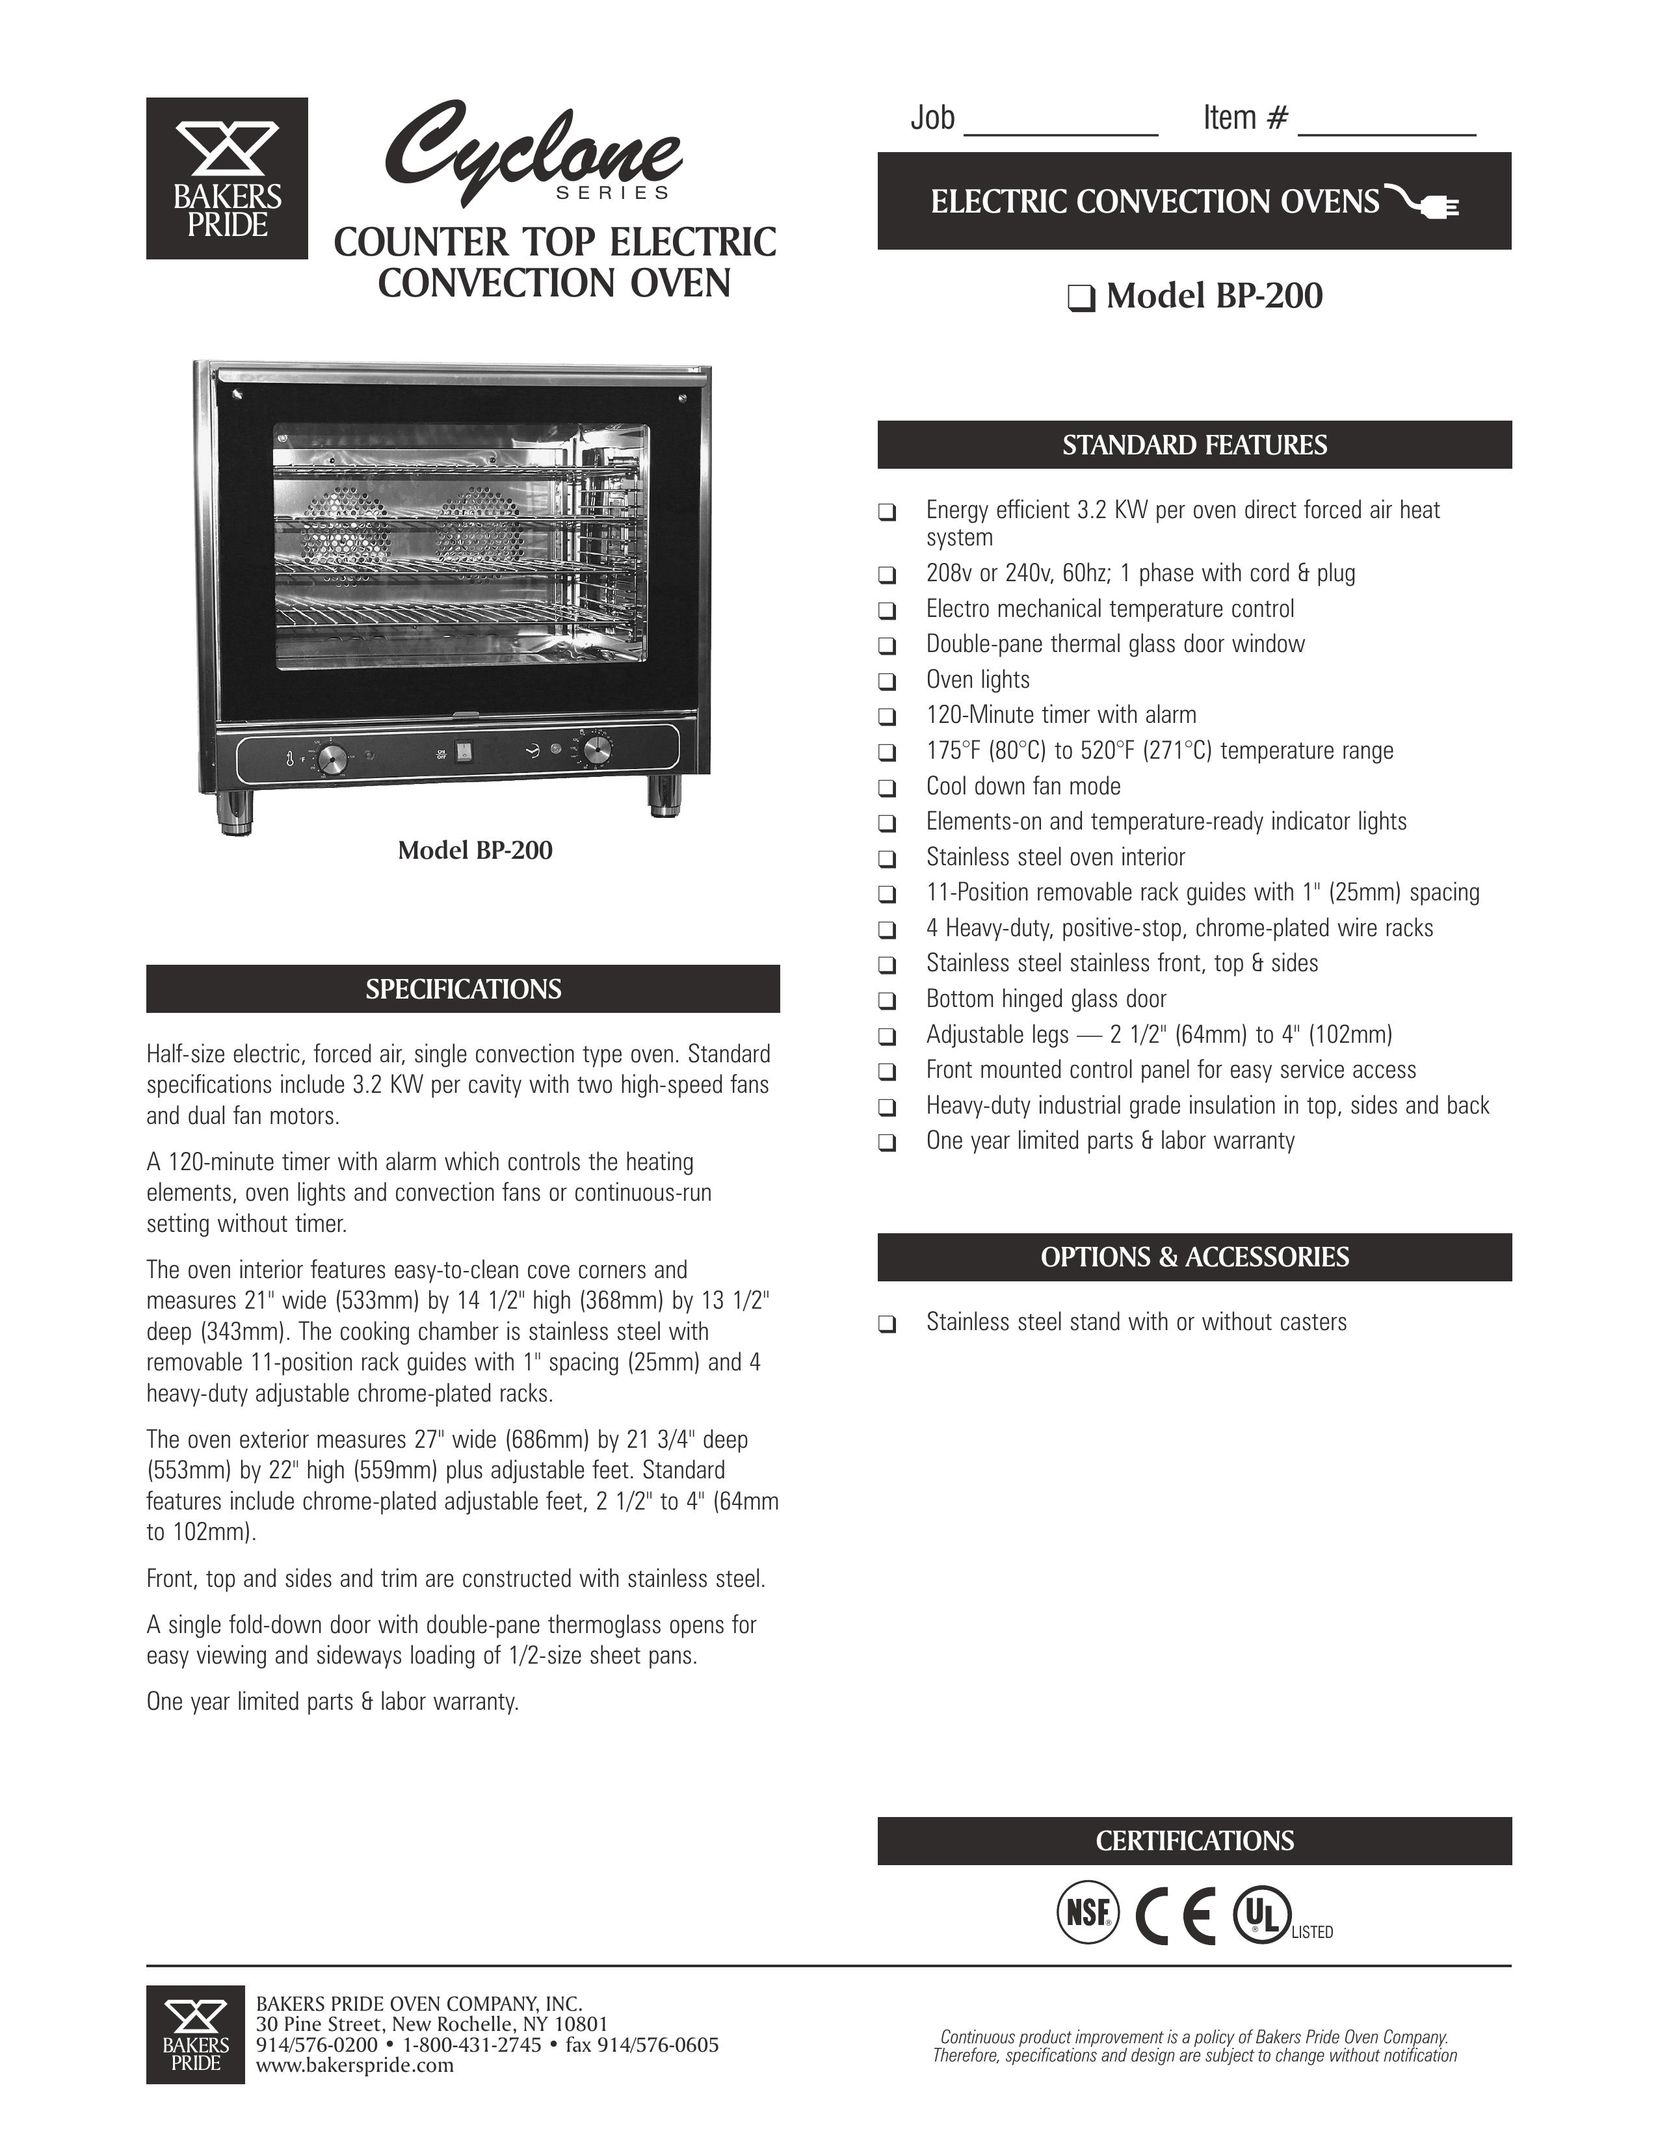 Bakers Pride Oven BP-200 Convection Oven User Manual